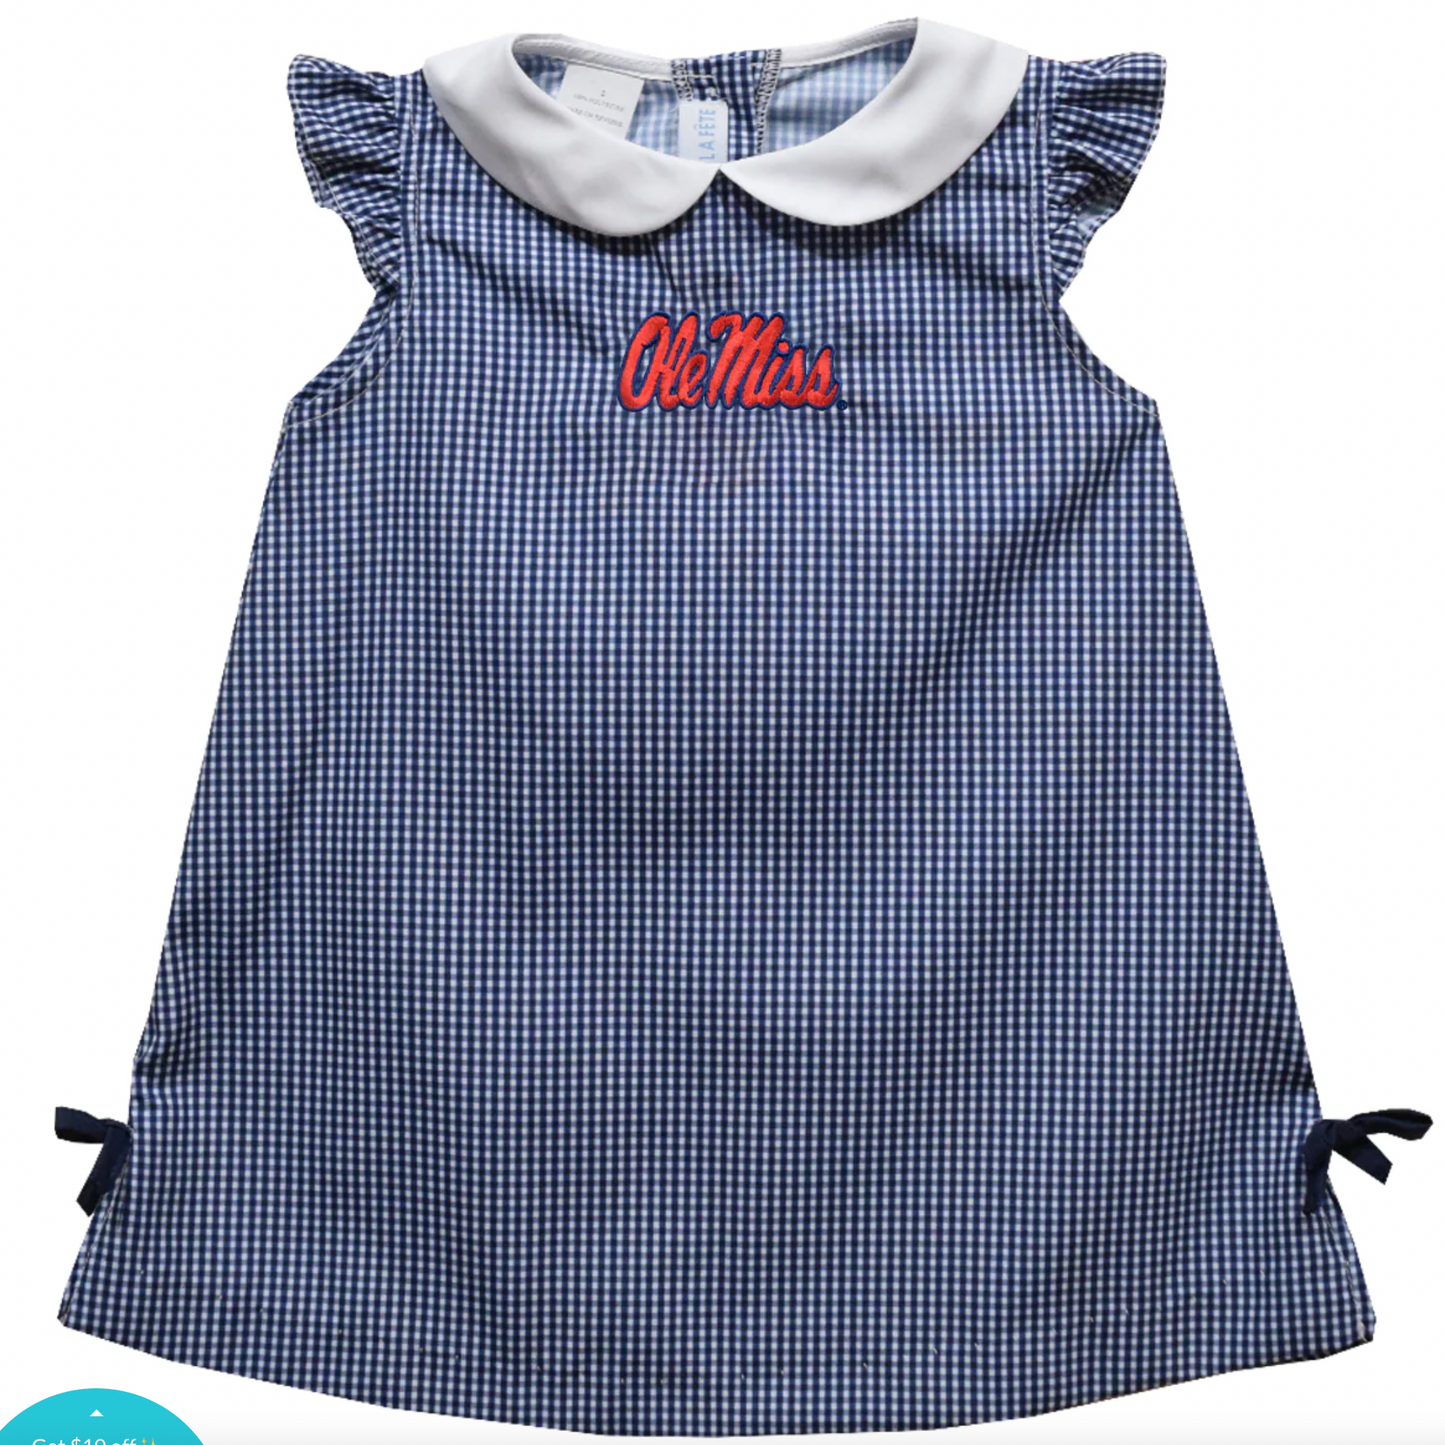 Ole Miss Rebels Embroidered Dress